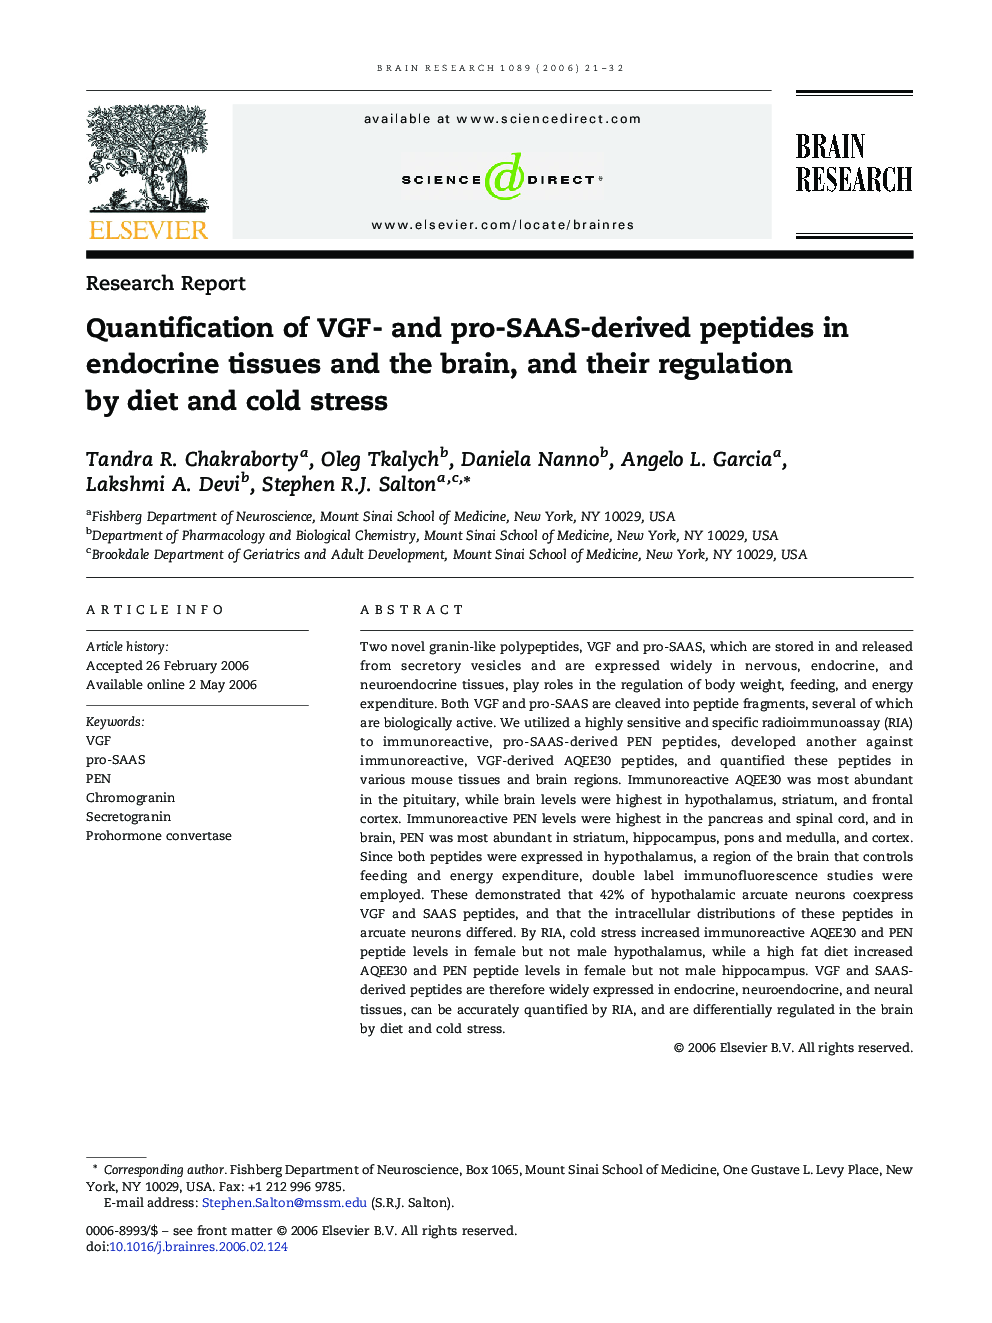 Quantification of VGF- and pro-SAAS-derived peptides in endocrine tissues and the brain, and their regulation by diet and cold stress